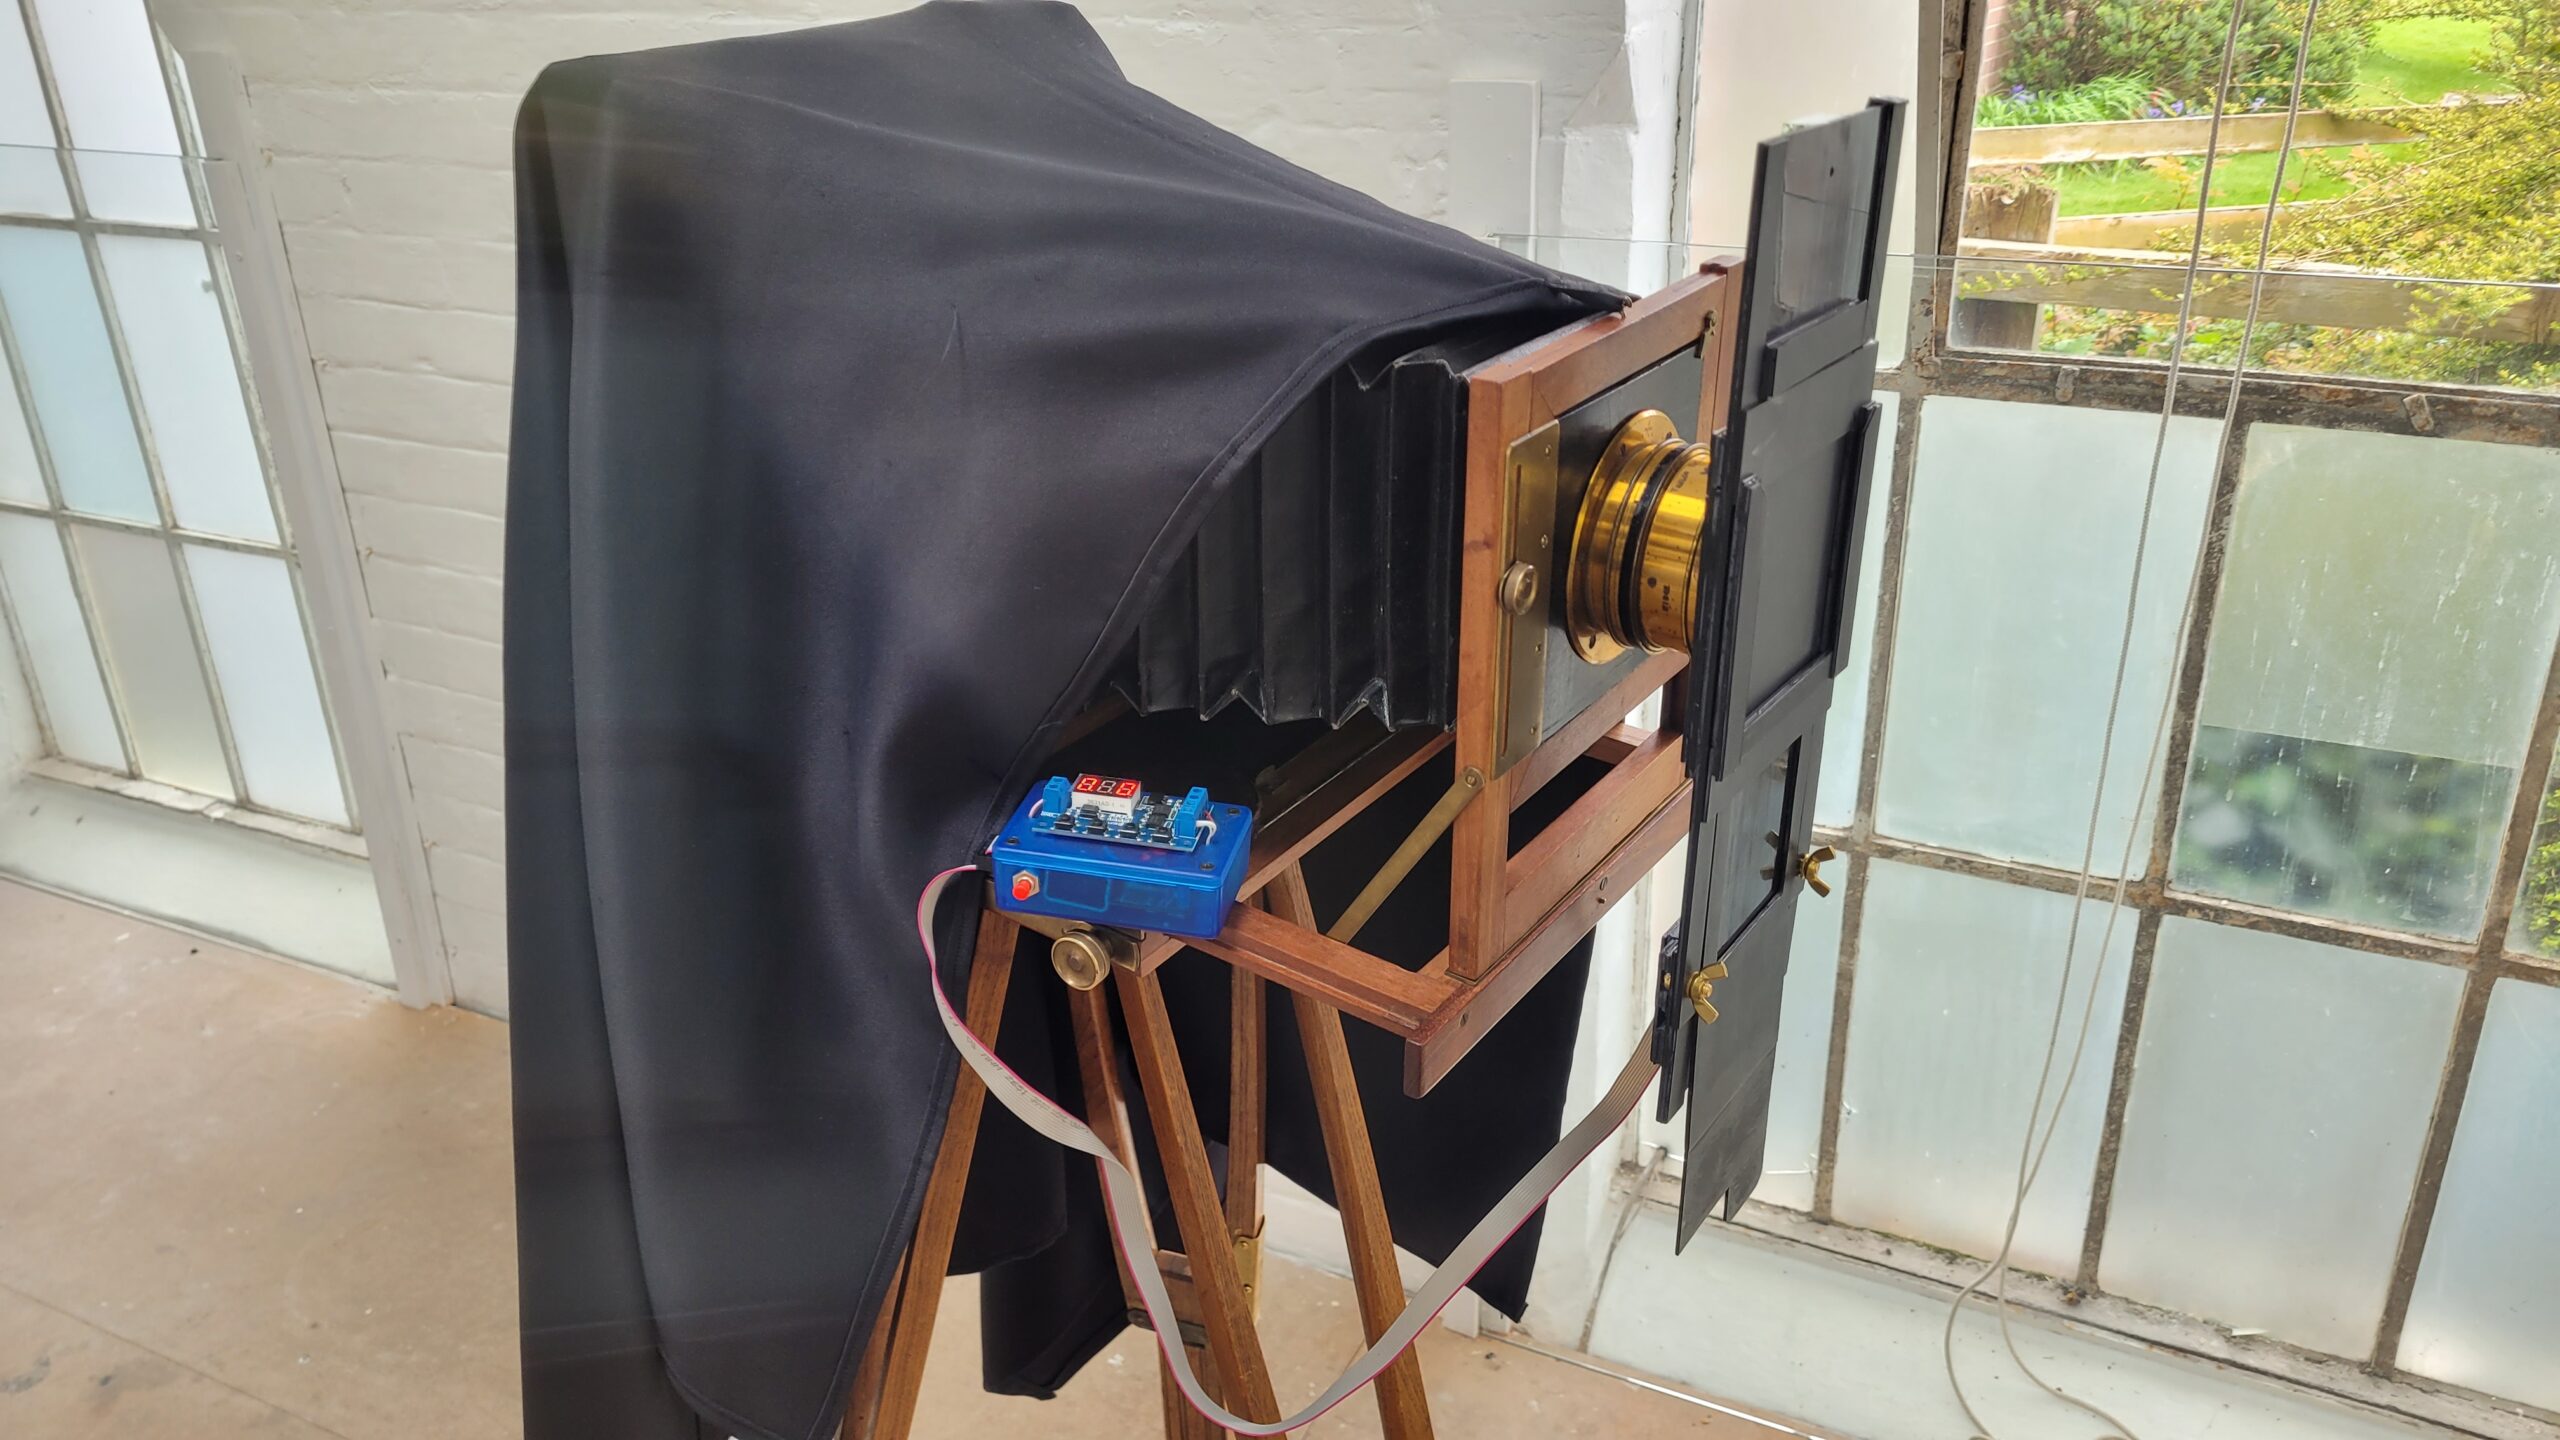 Large Format Drop Shutter in Action